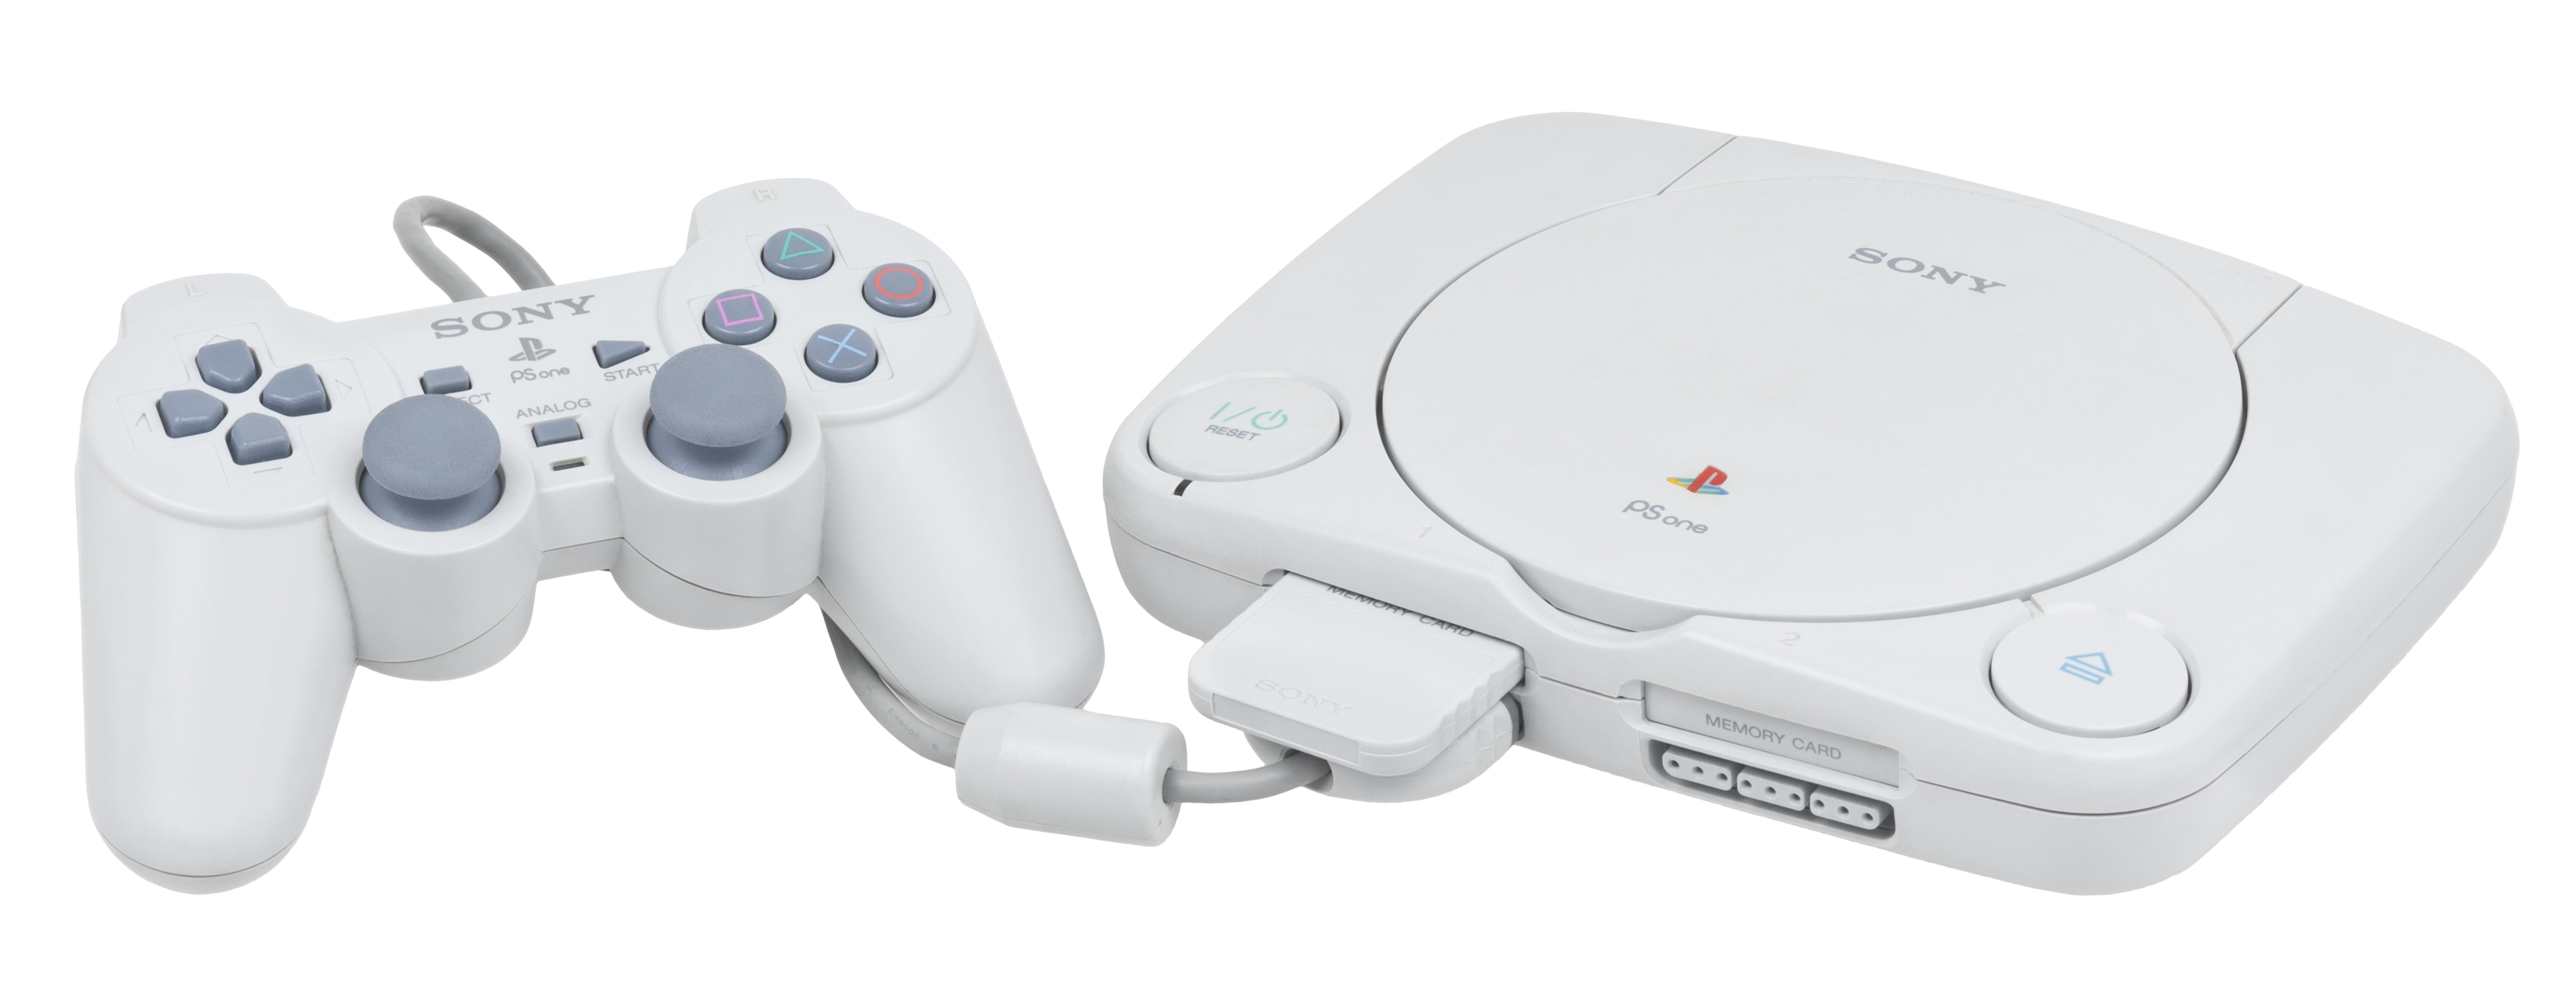 Category:PlayStation 1 games, PlayStation Wiki